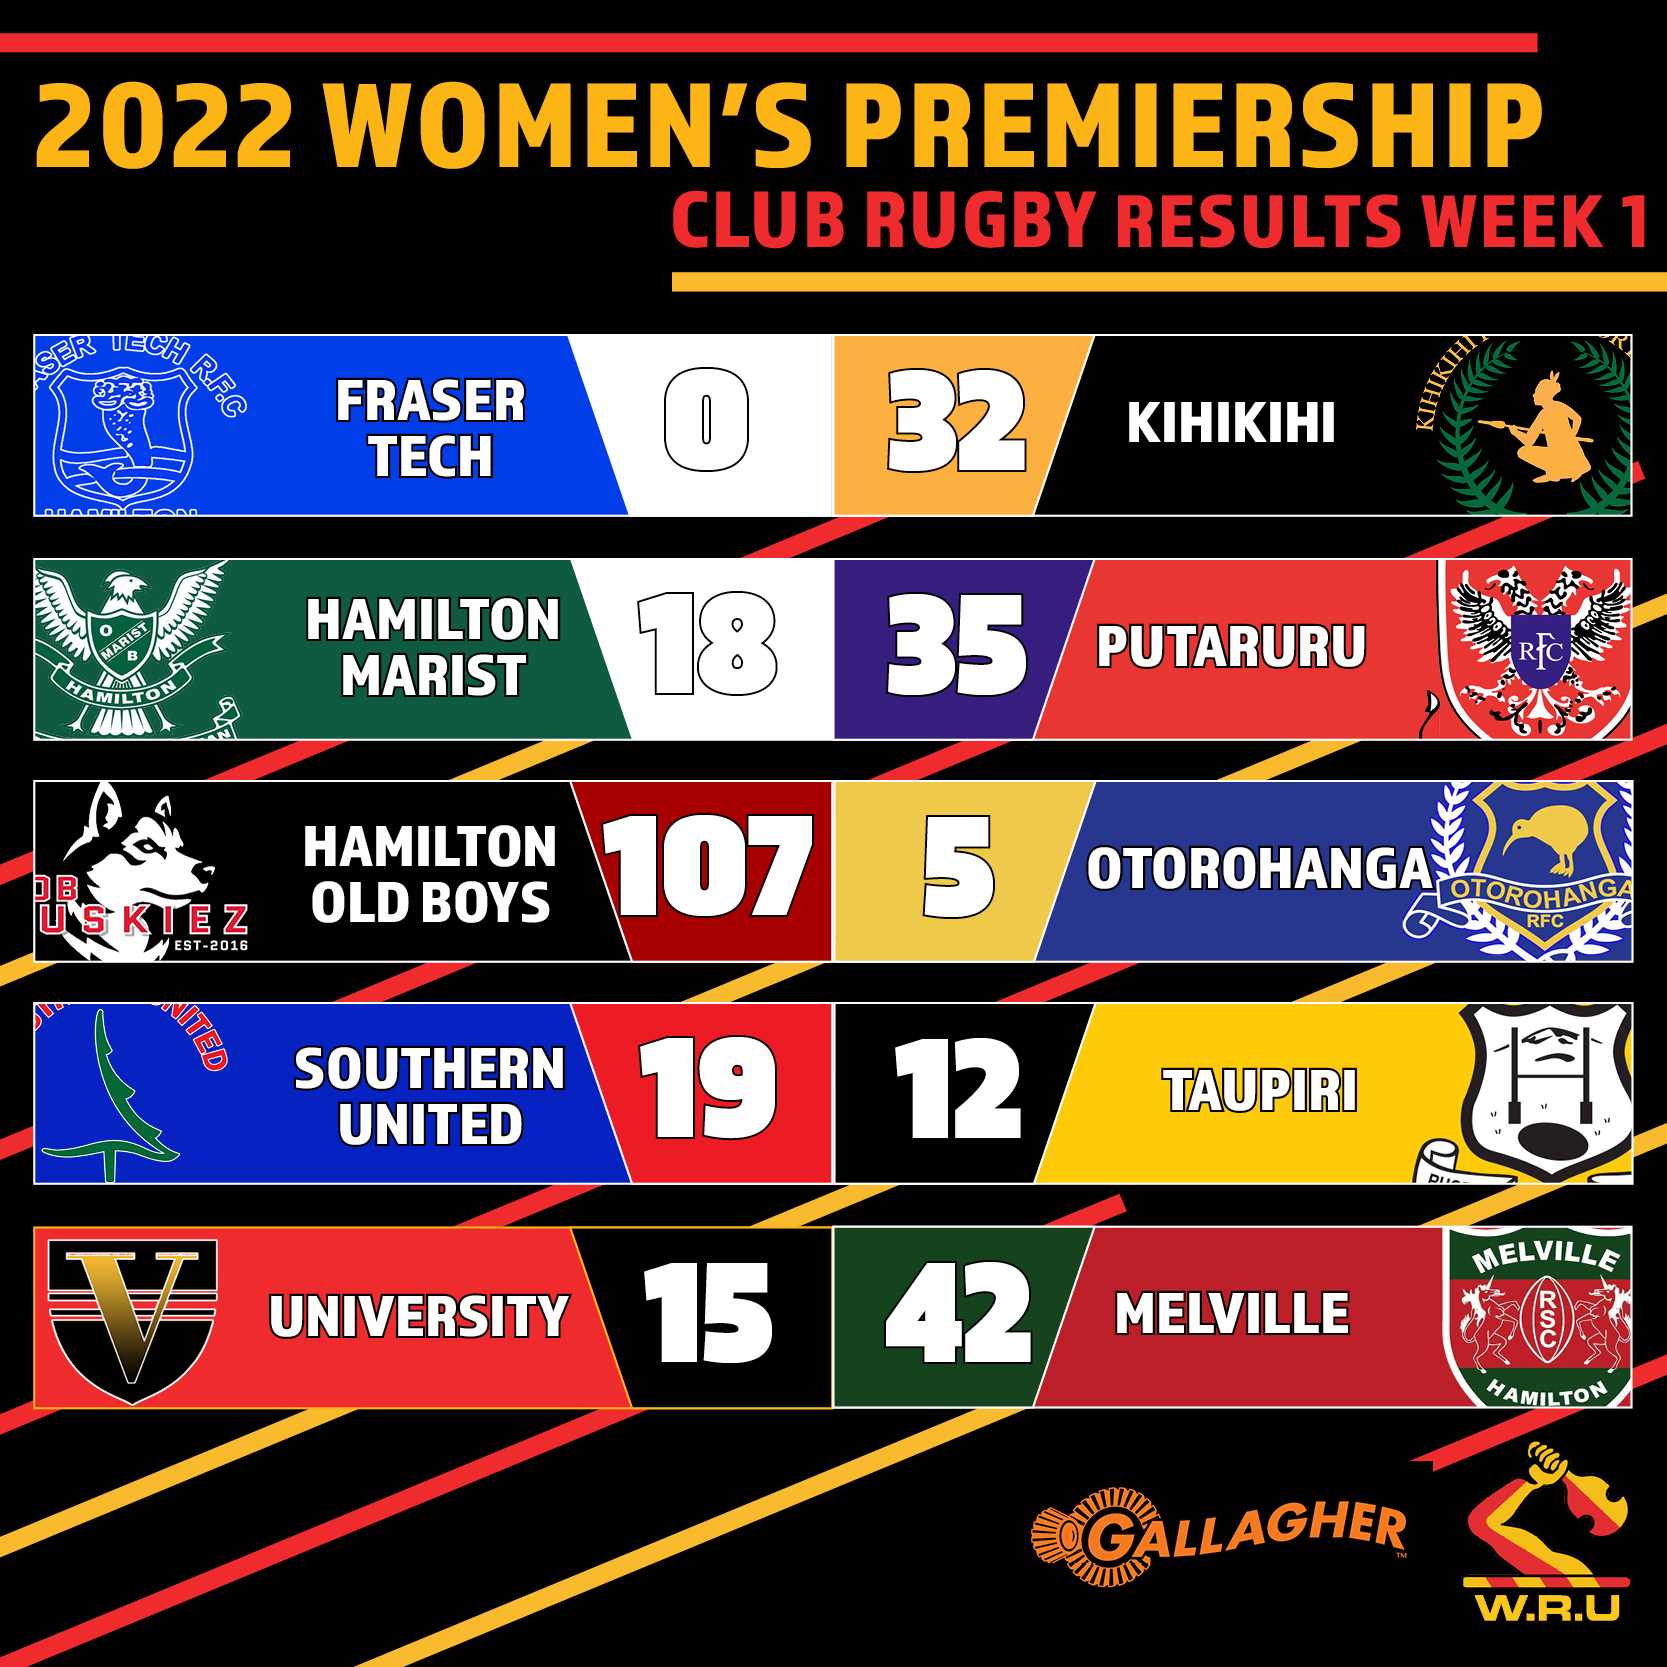 Waikato Club Rugby Results 9 April 2022